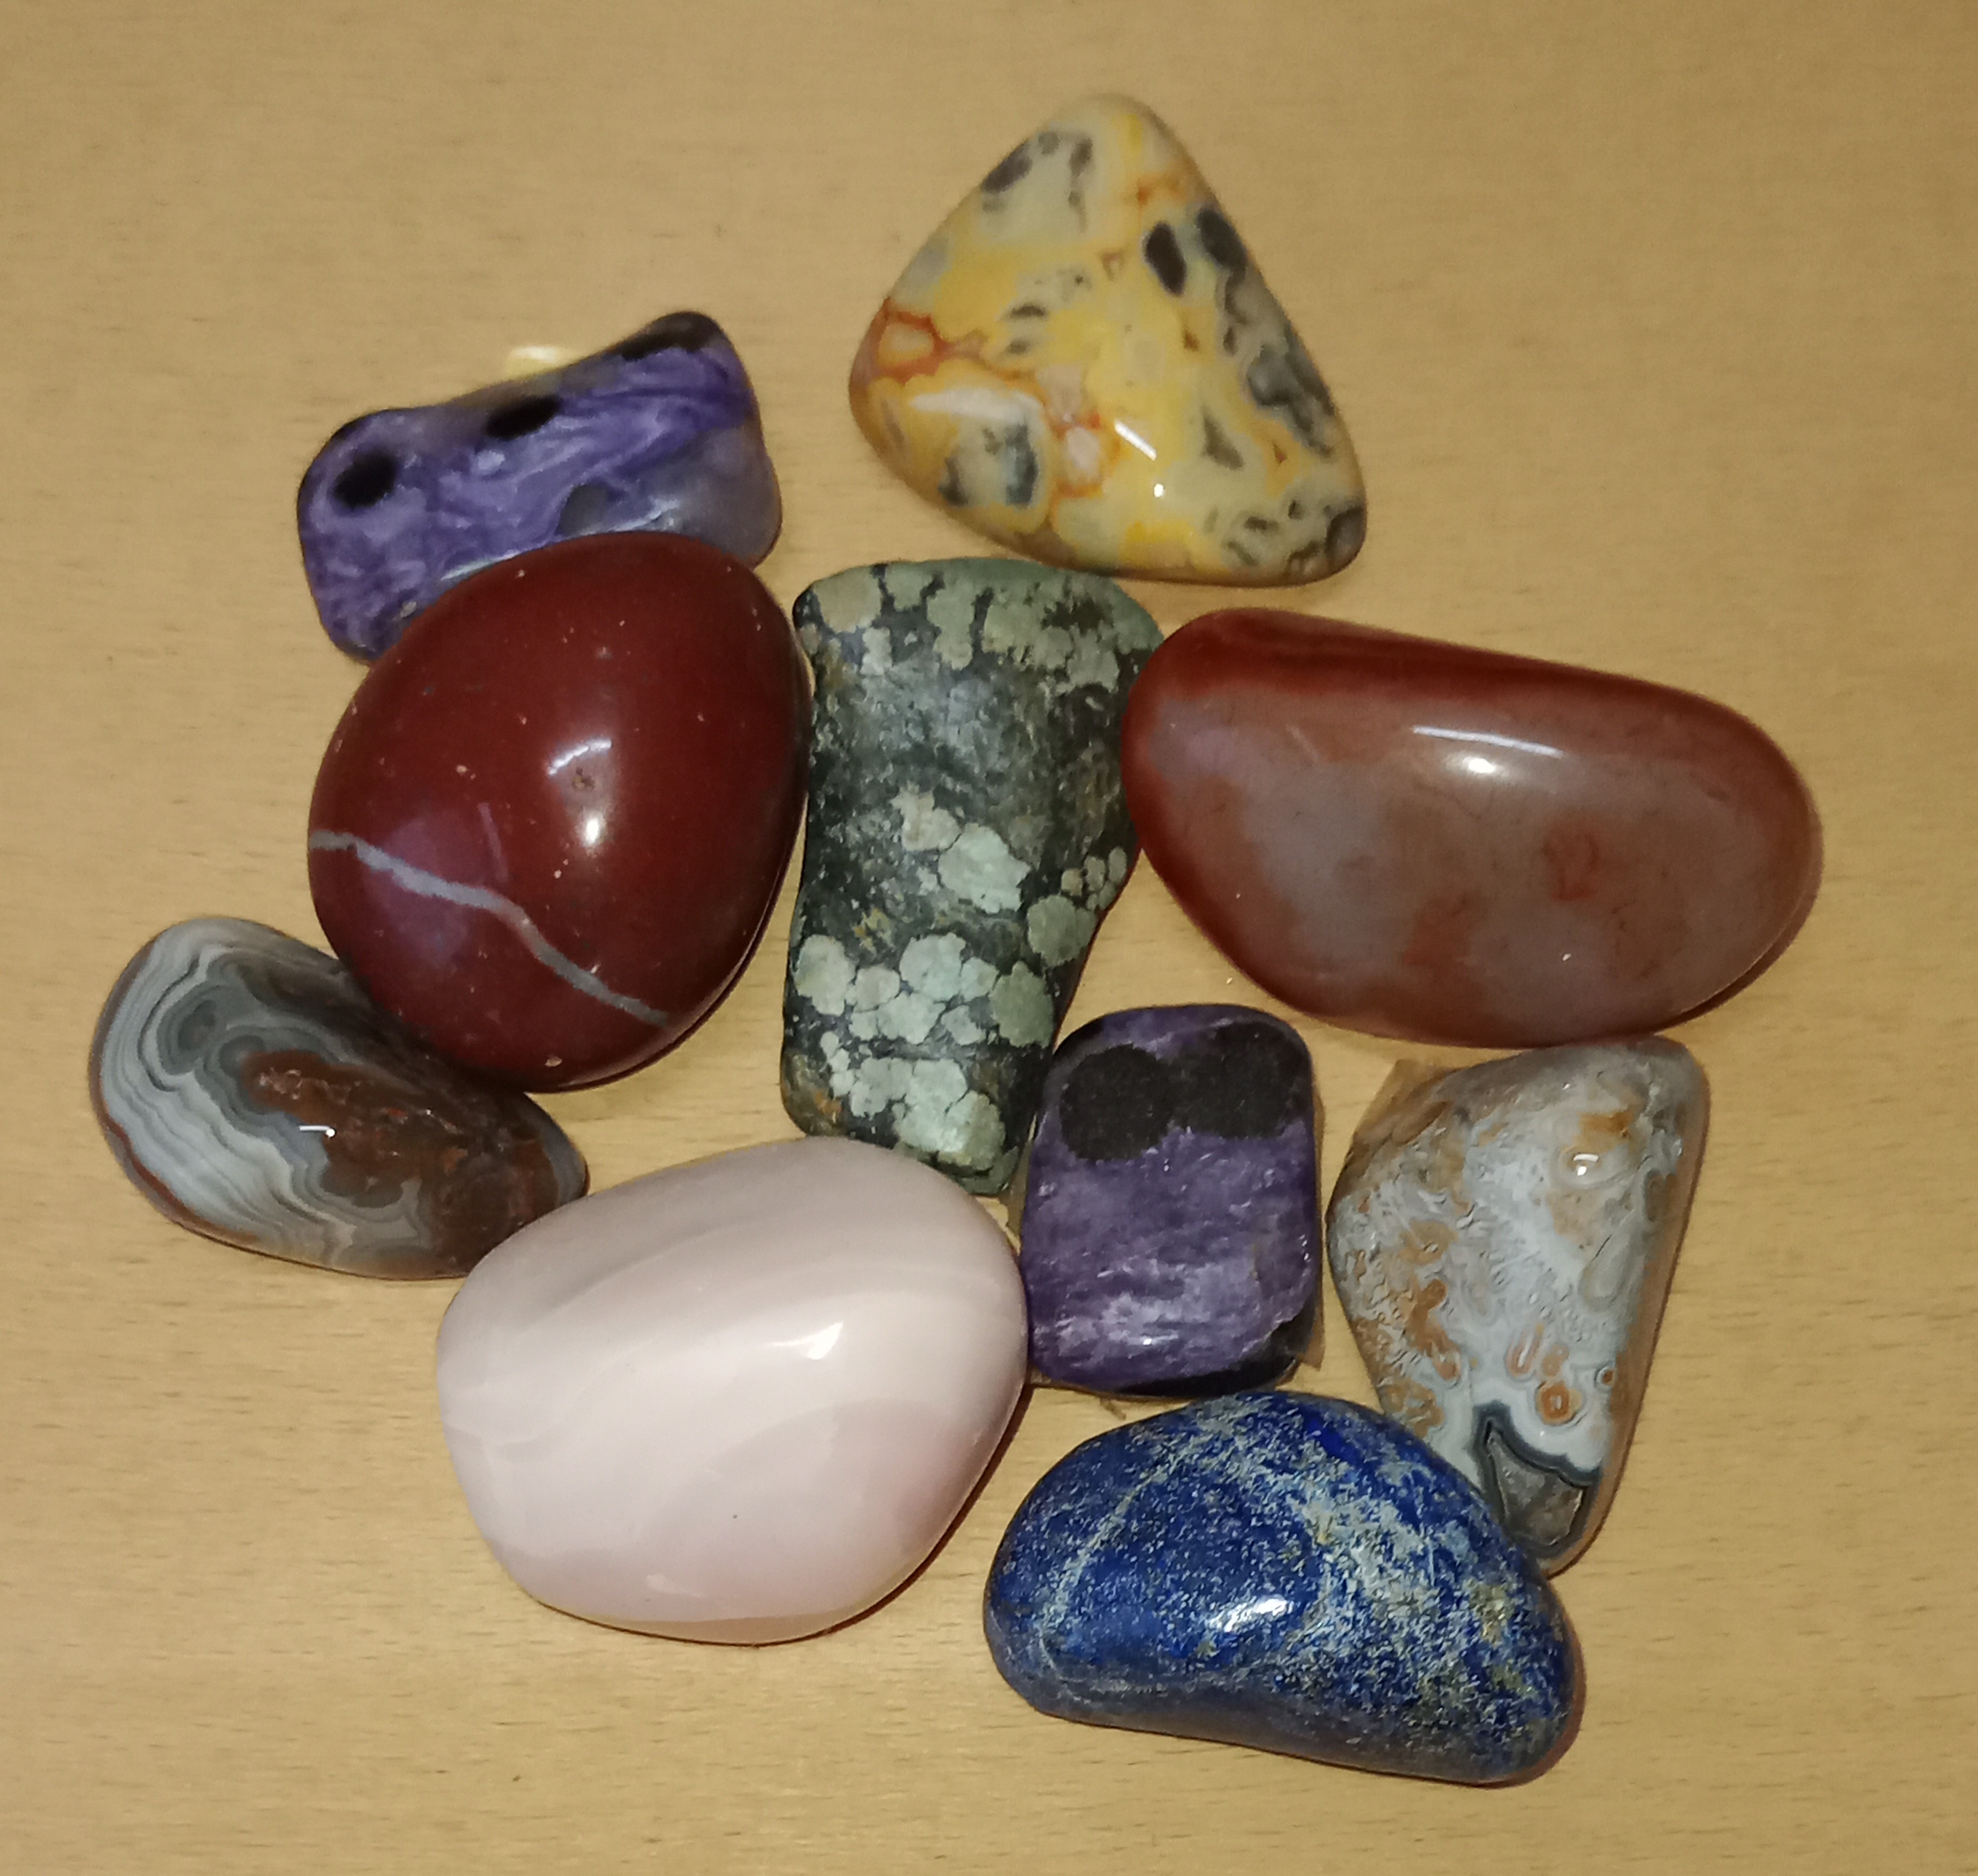 Stones by name